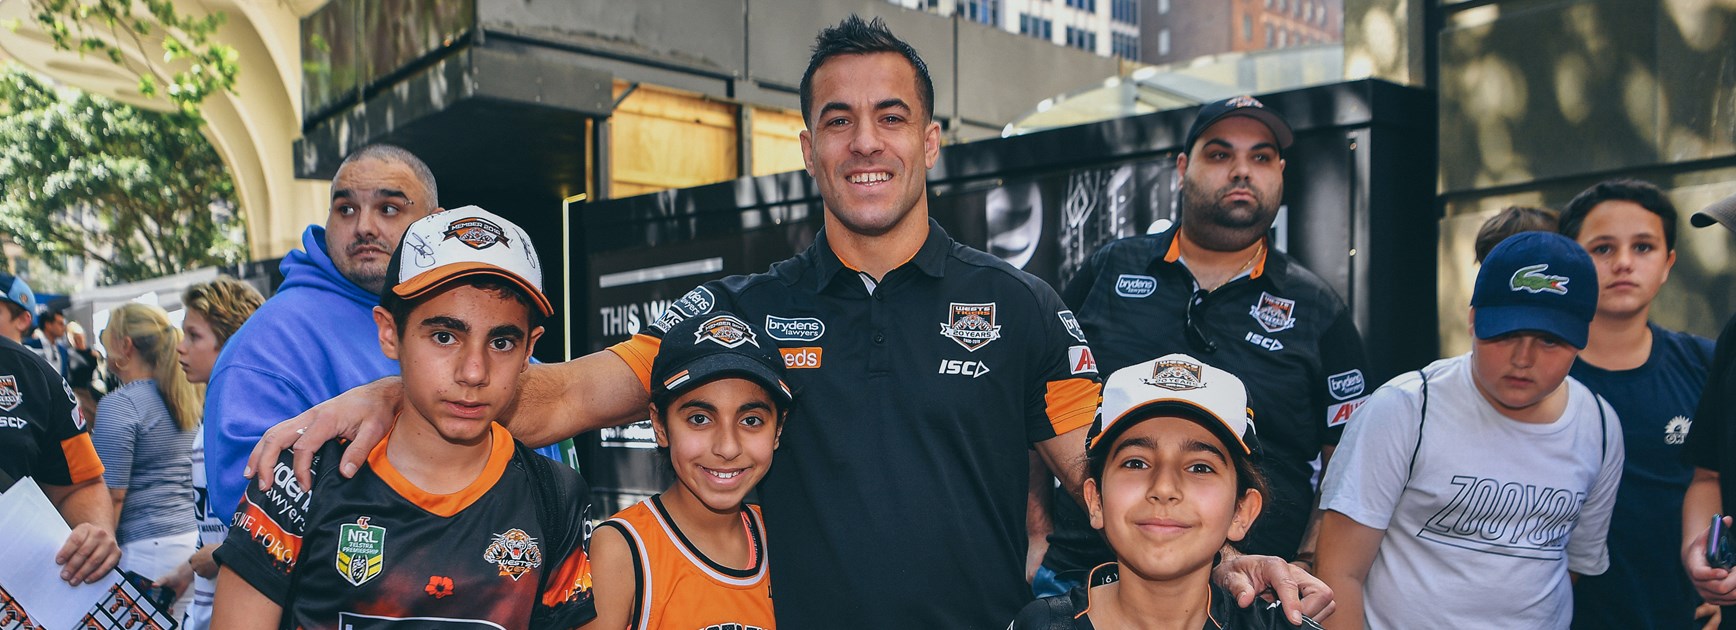 Wests Tigers in the Community: December, 2019